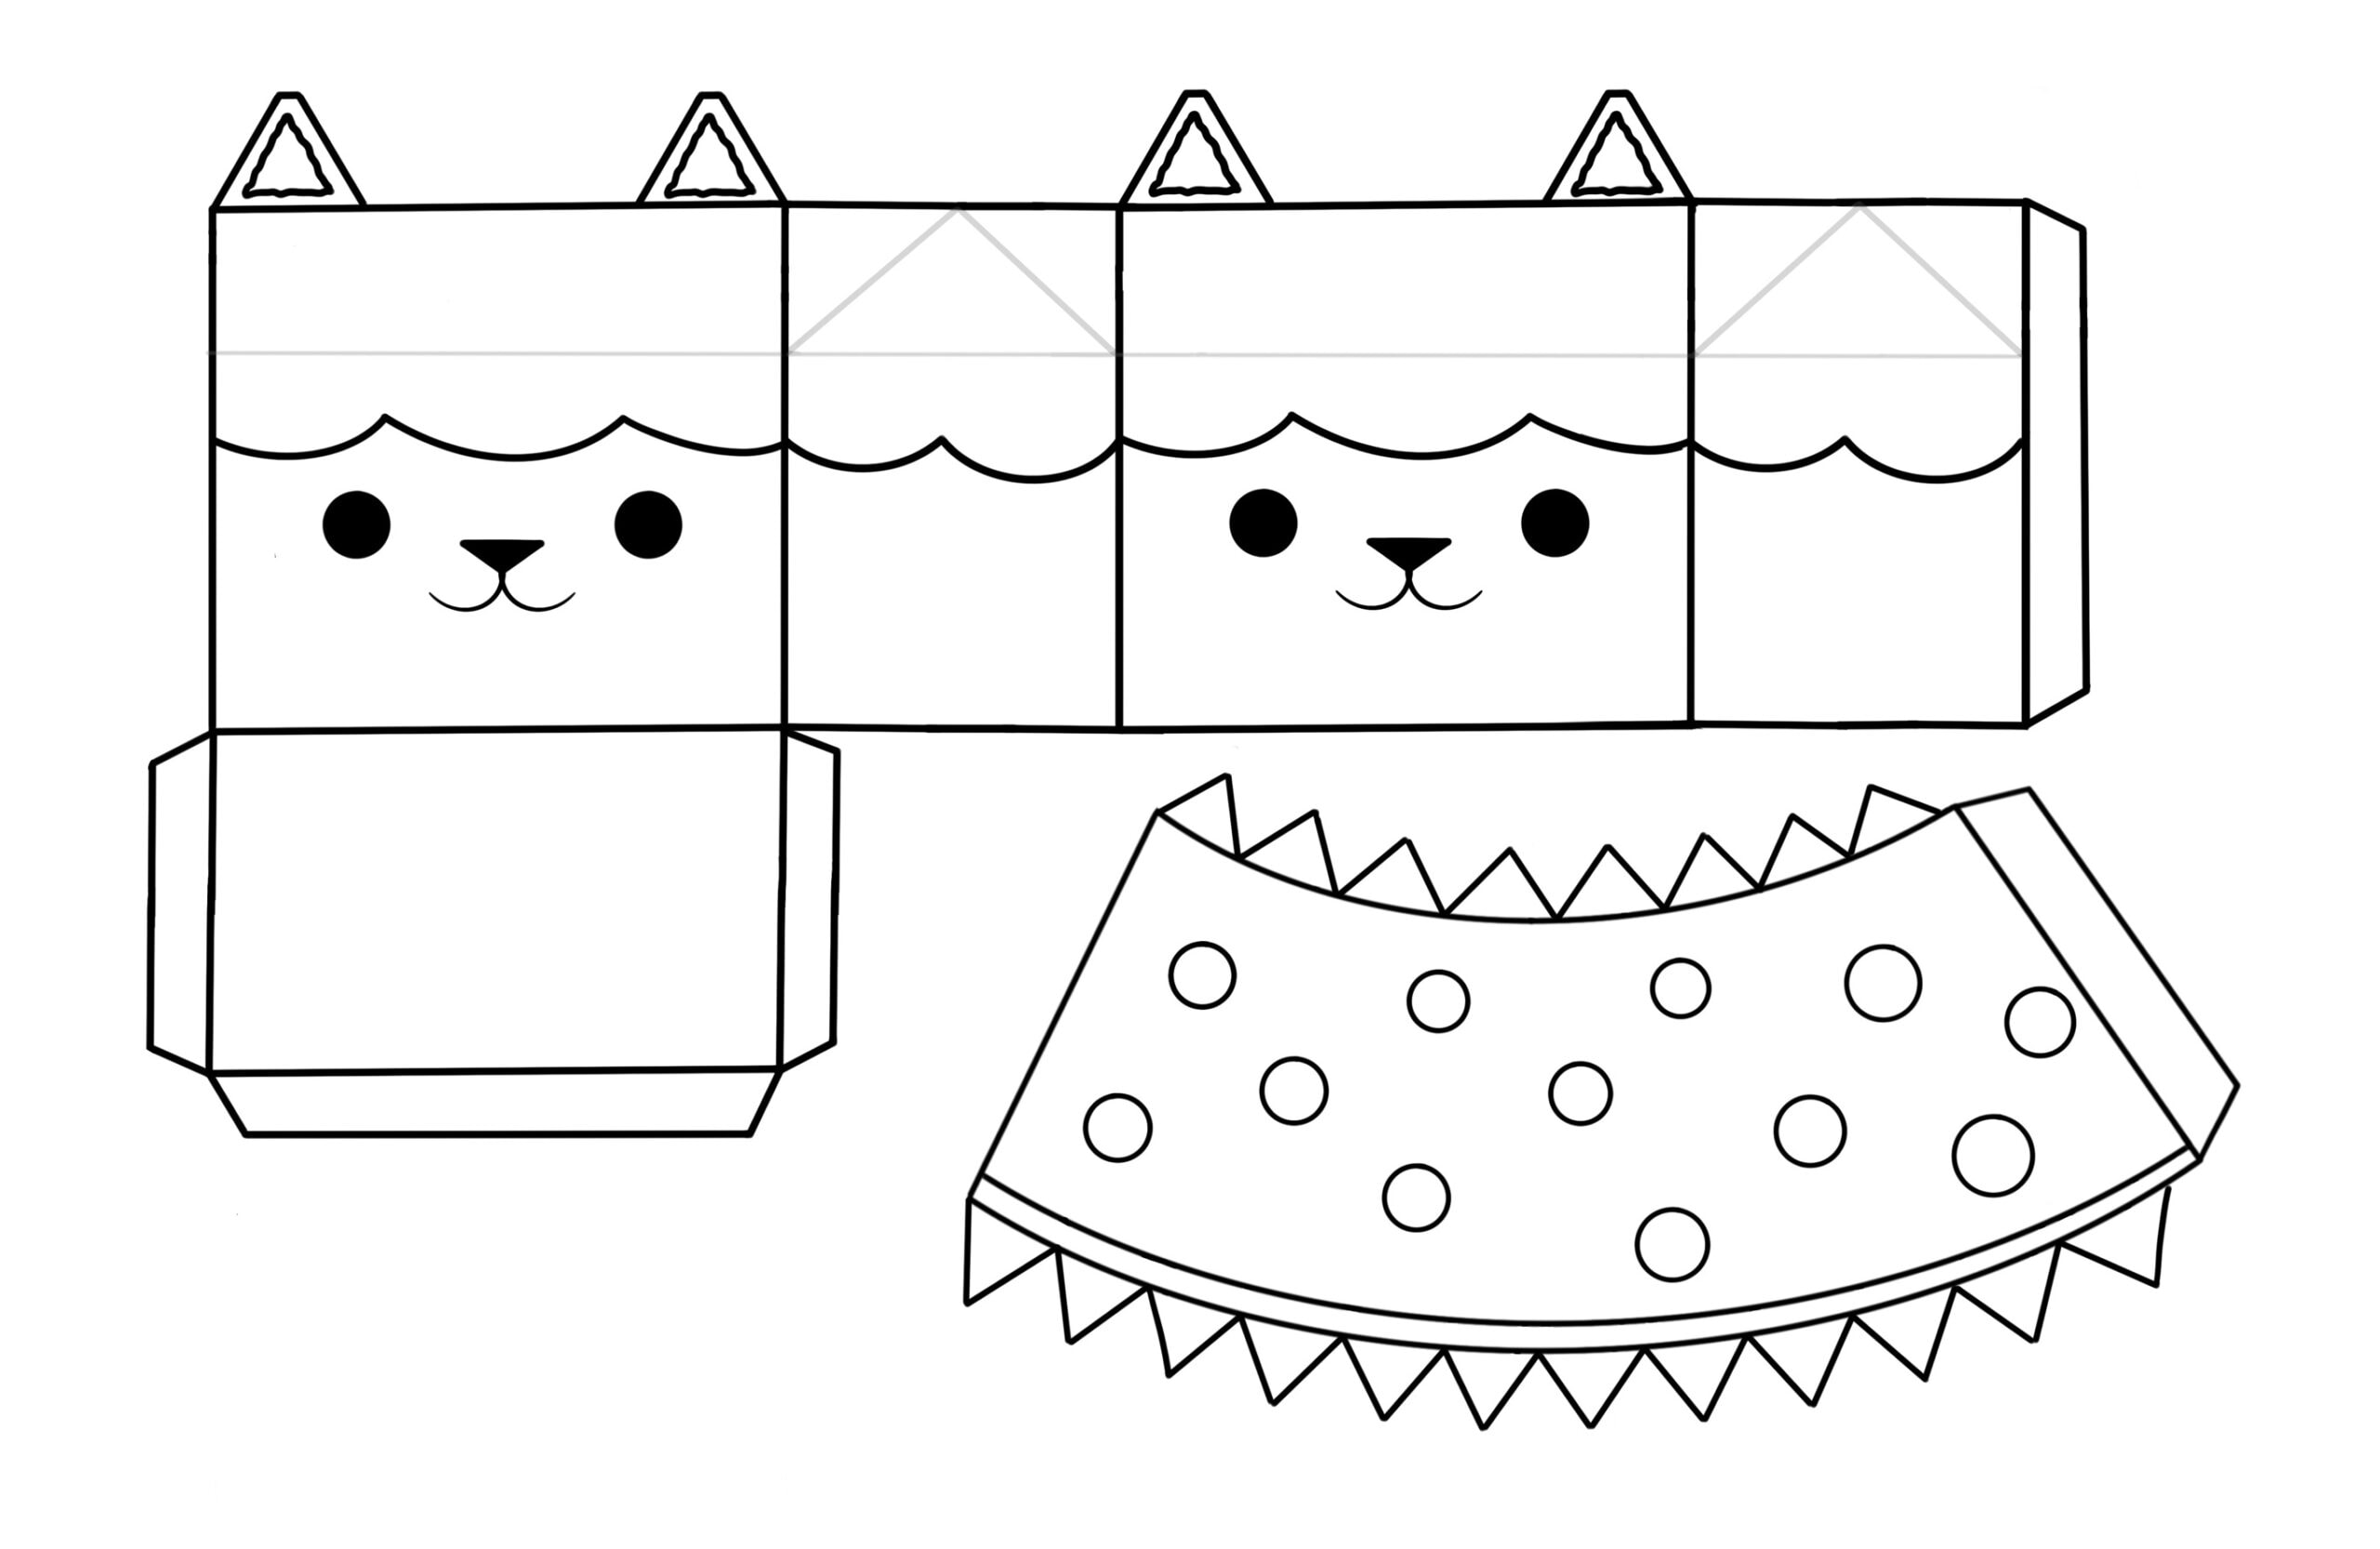 Paper Toy Templates - 14 Free Printables to Craft and Play!